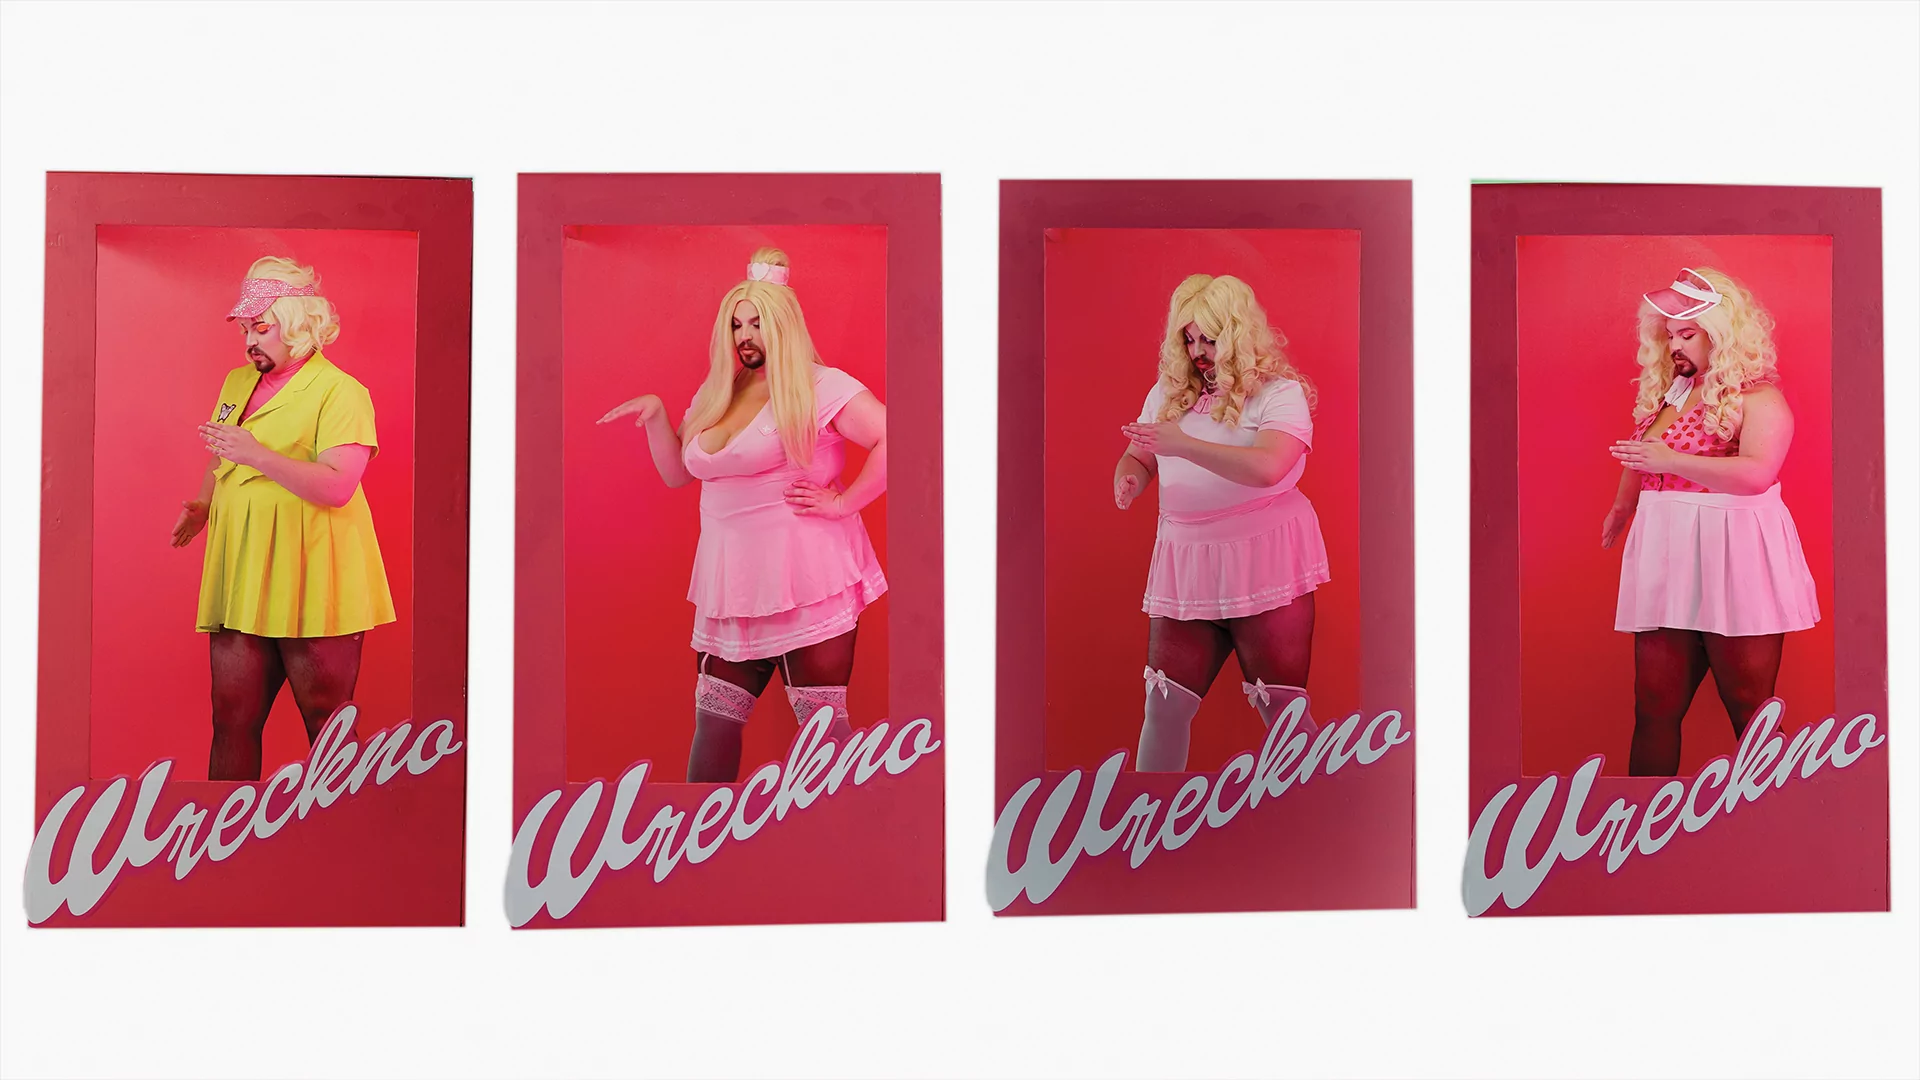 Four stills from Wreckno's EZ music video, wearing various pink and yellow dresses and hats in a blonde wig